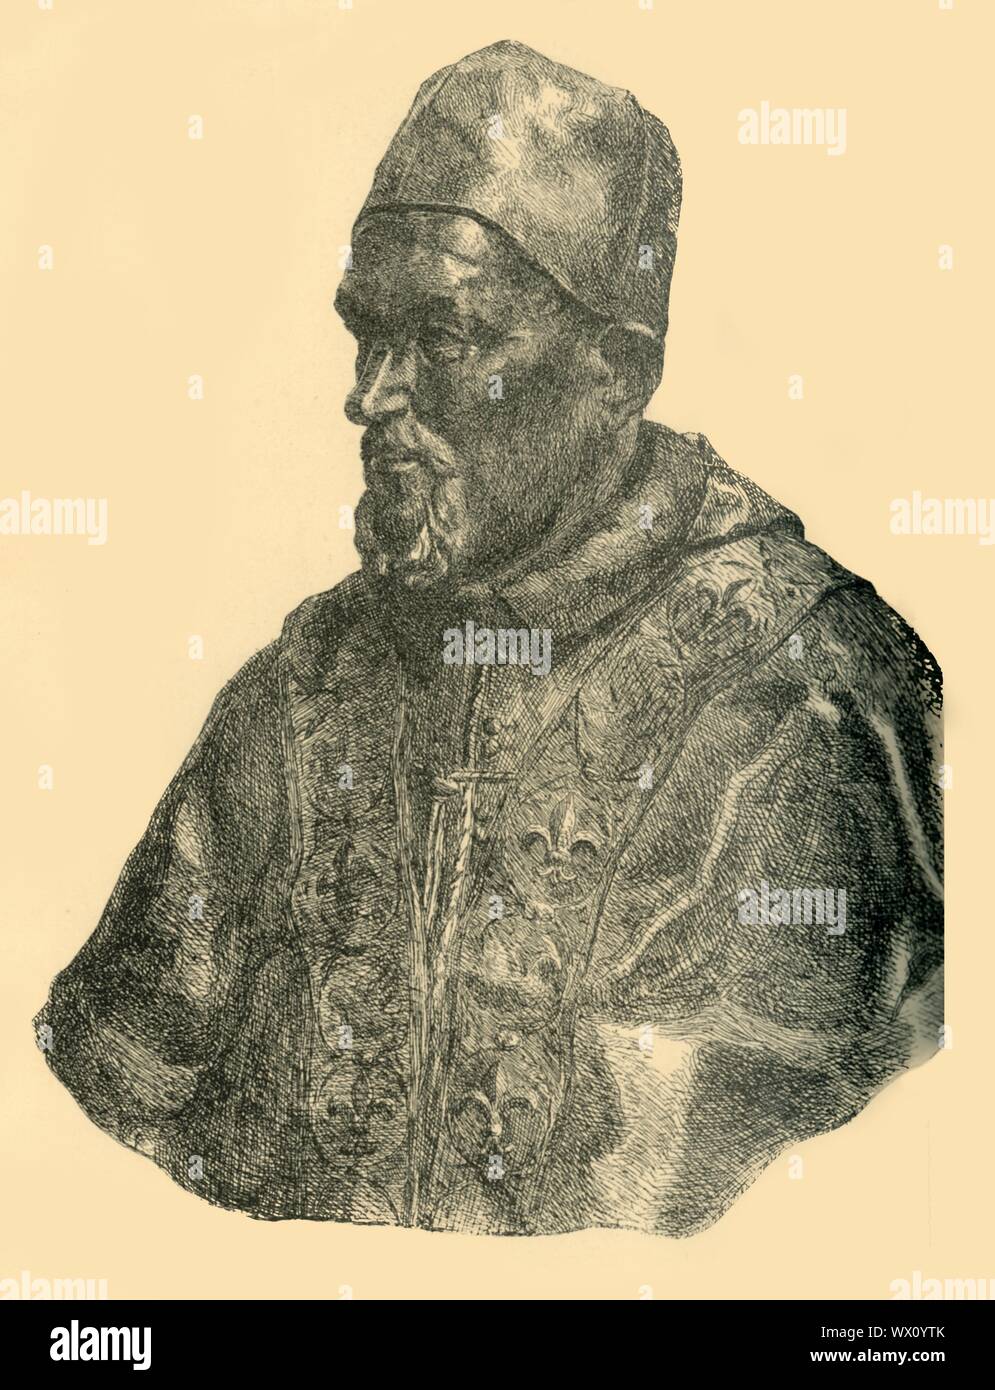 Bust of Pope Innocent X, c1690, (1881). Etching of a bronze portrait bust of Giambattista Pamphili, Innocent X (1574-1655), made posthumously by Domenico Guidi in Rome. The sculpture is based on an earlier terracotta model of 1650 by Alessandro Algardi, who was Guidi's master. From &quot;The South Kensington Museum&quot;, a book of engraved illustrations, with descriptions, of the works of art in the collection of the Victoria &amp; Albert Museum in London (formerly known as the South Kensington Museum). [Sampson Low, Marston, Searle and Rivington, London, 1881] Stock Photo